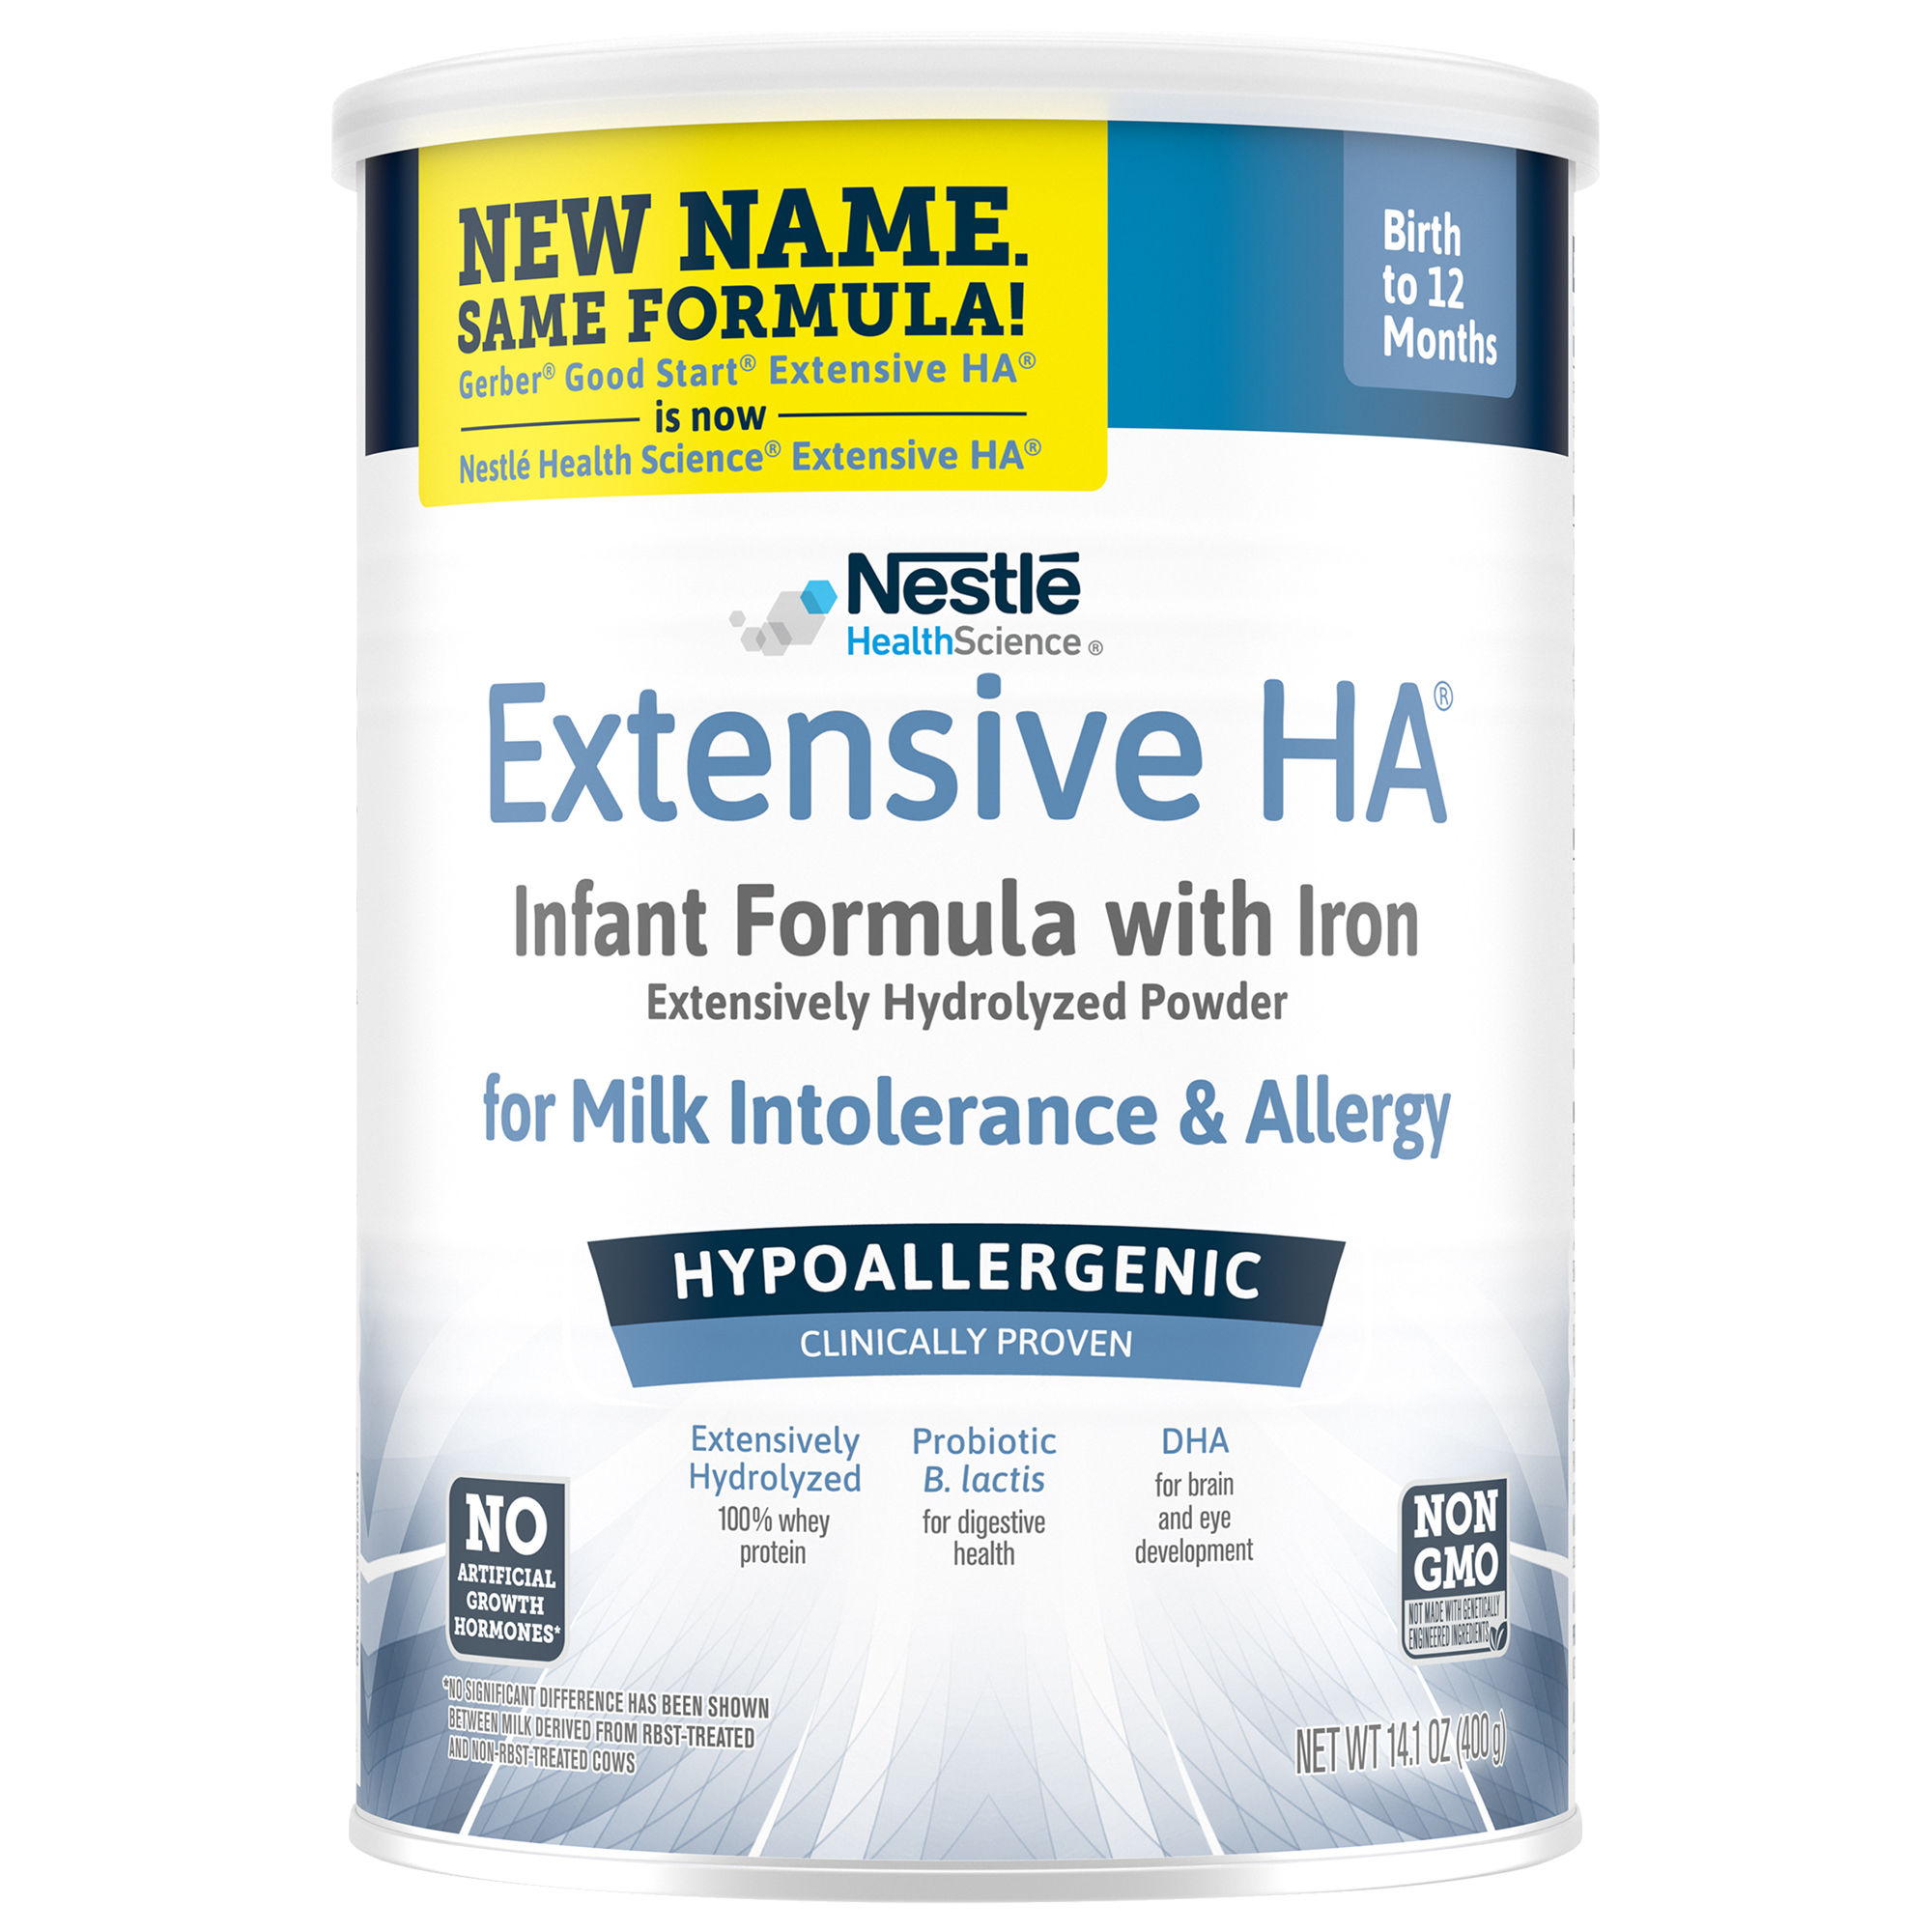 Extensive HA® Hypoallergenic Infant Formula With Iron, DHA & Probiotic, 14.1 oz Can (Packaging May Vary) - image 1 of 9